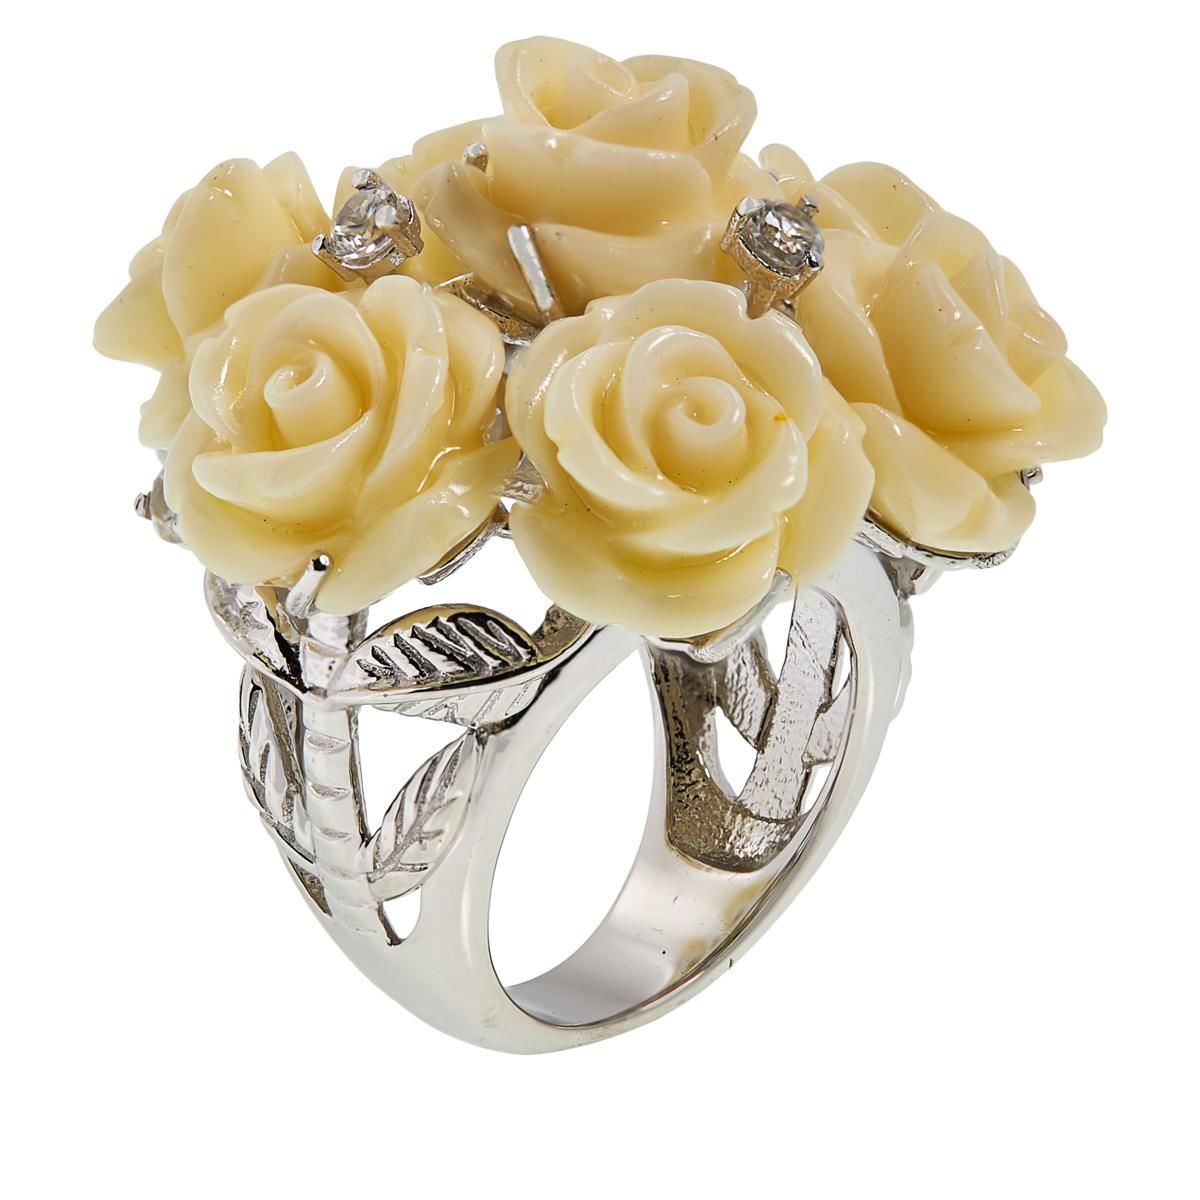 Rarities Carved Coral and White Zircon Rose Bouquet Ring, Size 5 - HSN $150